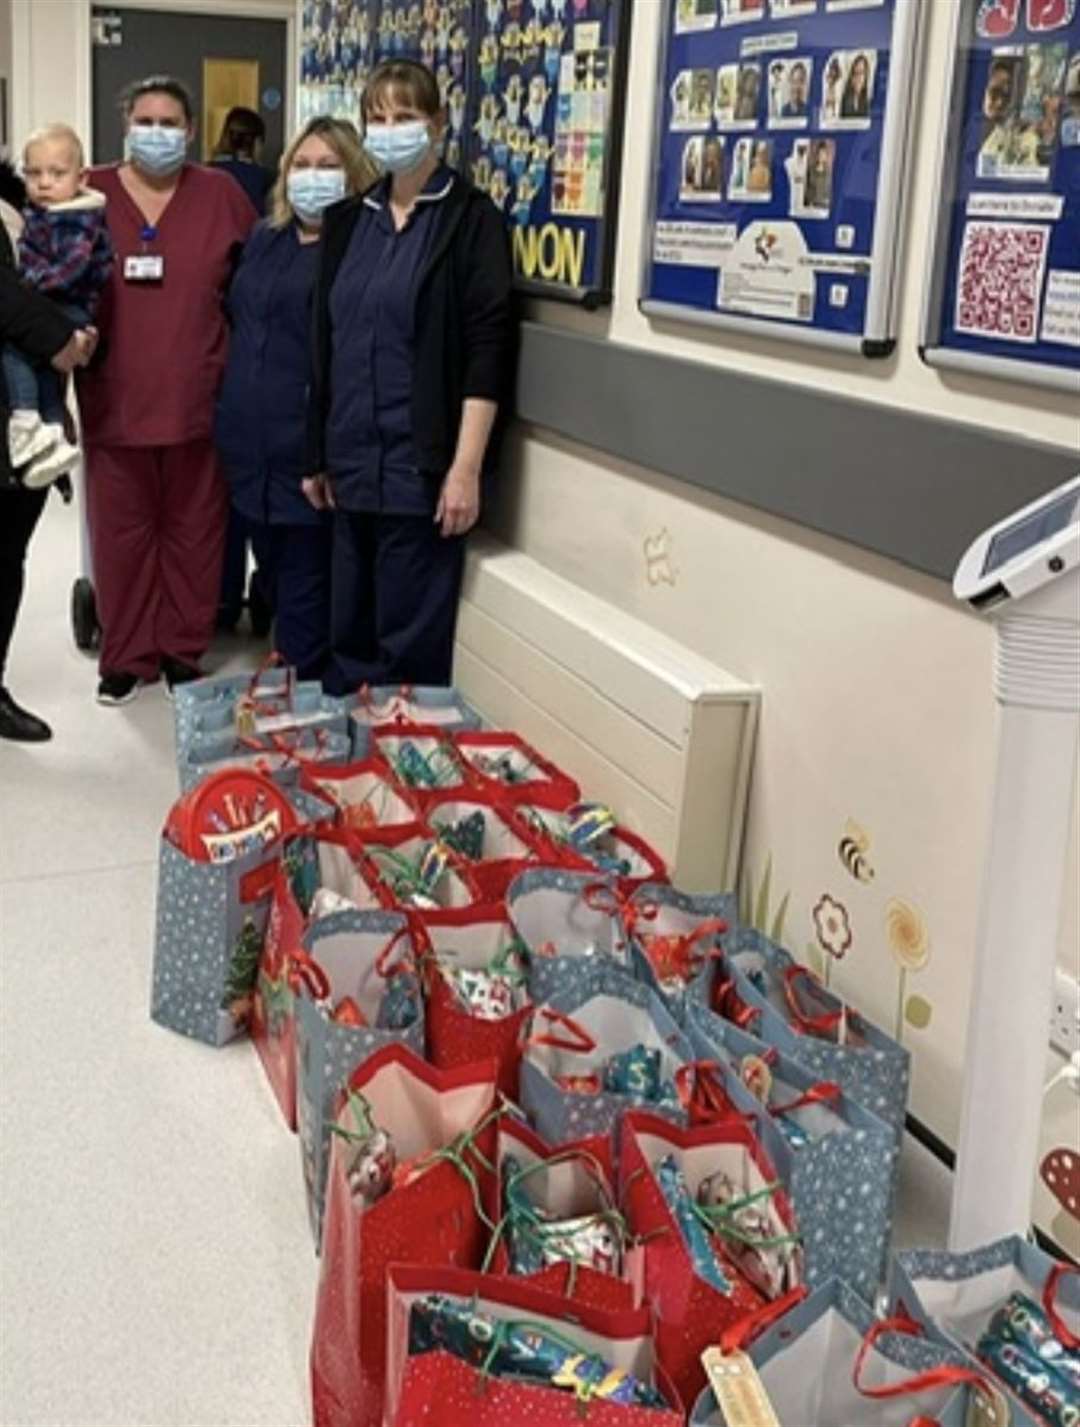 The 24 gift bags were handed to the unit at the William Harvey